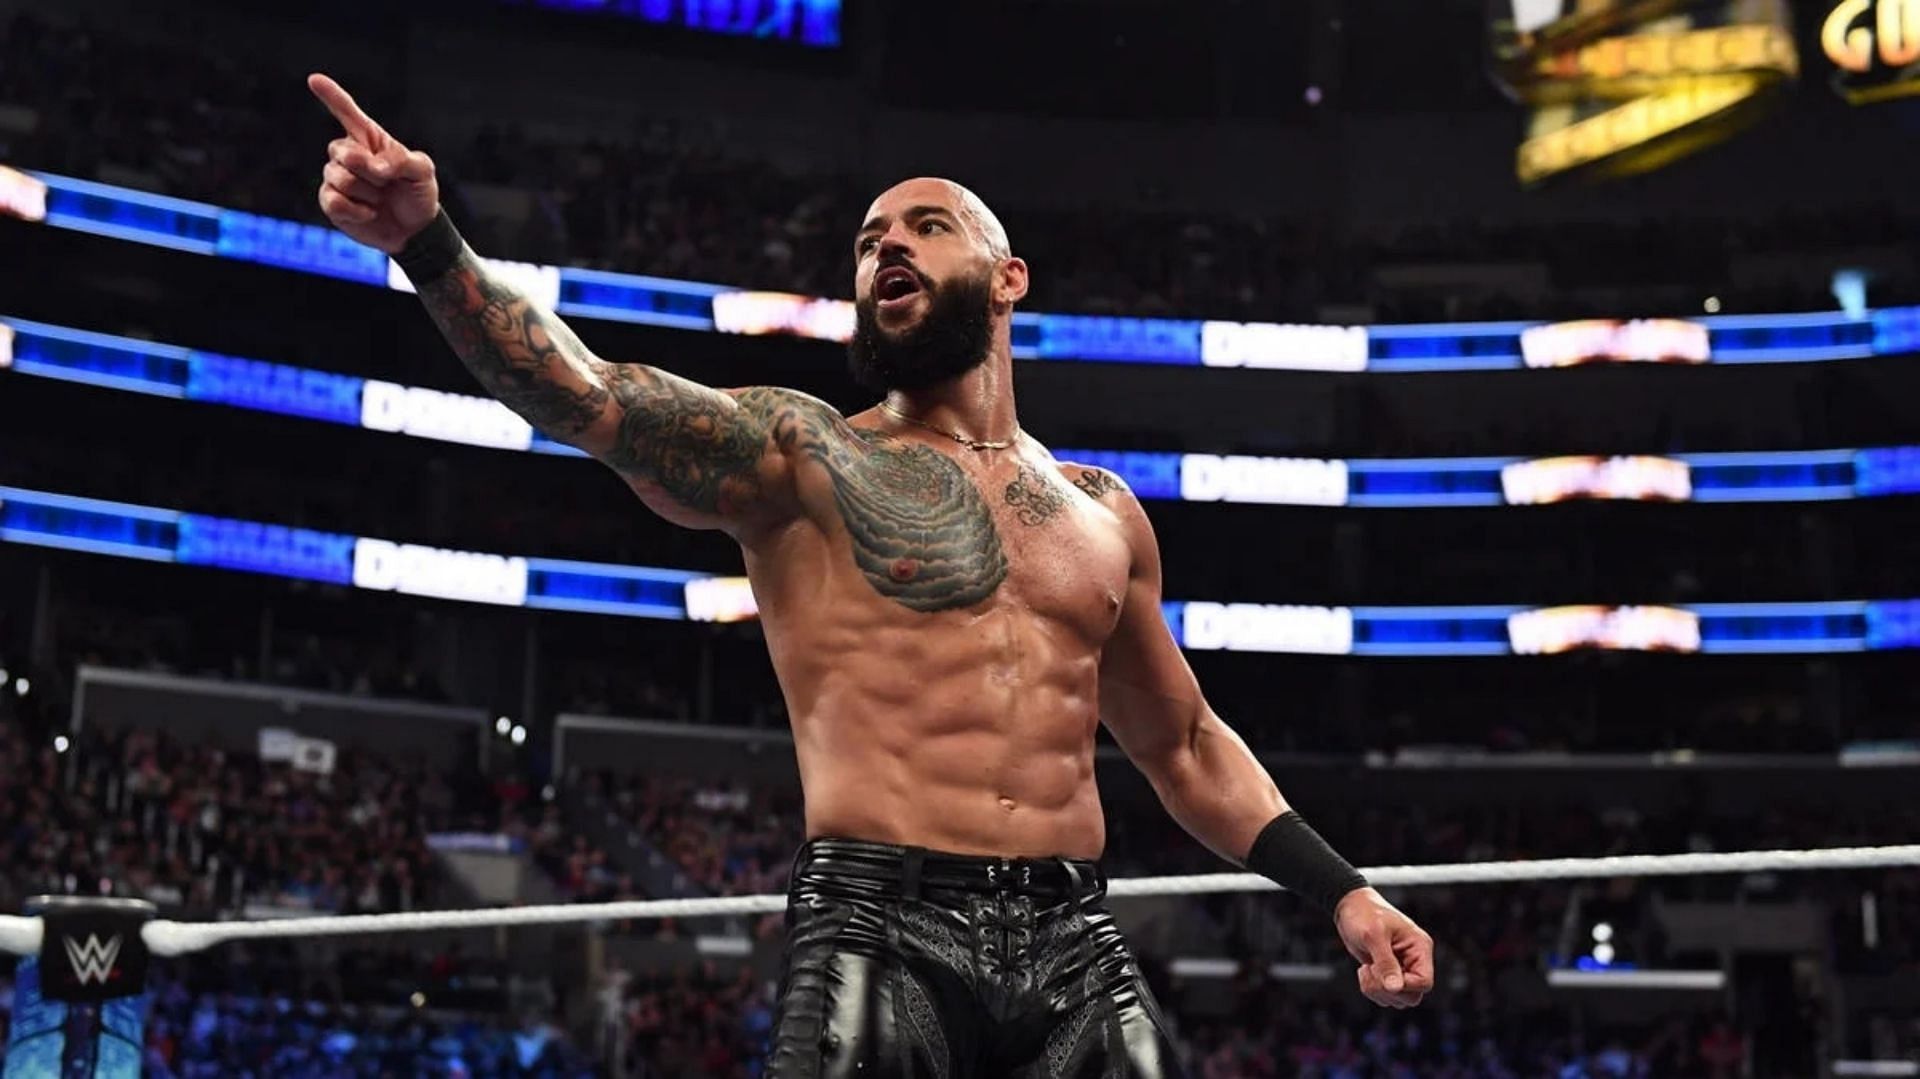 Ricochet standing in the ring